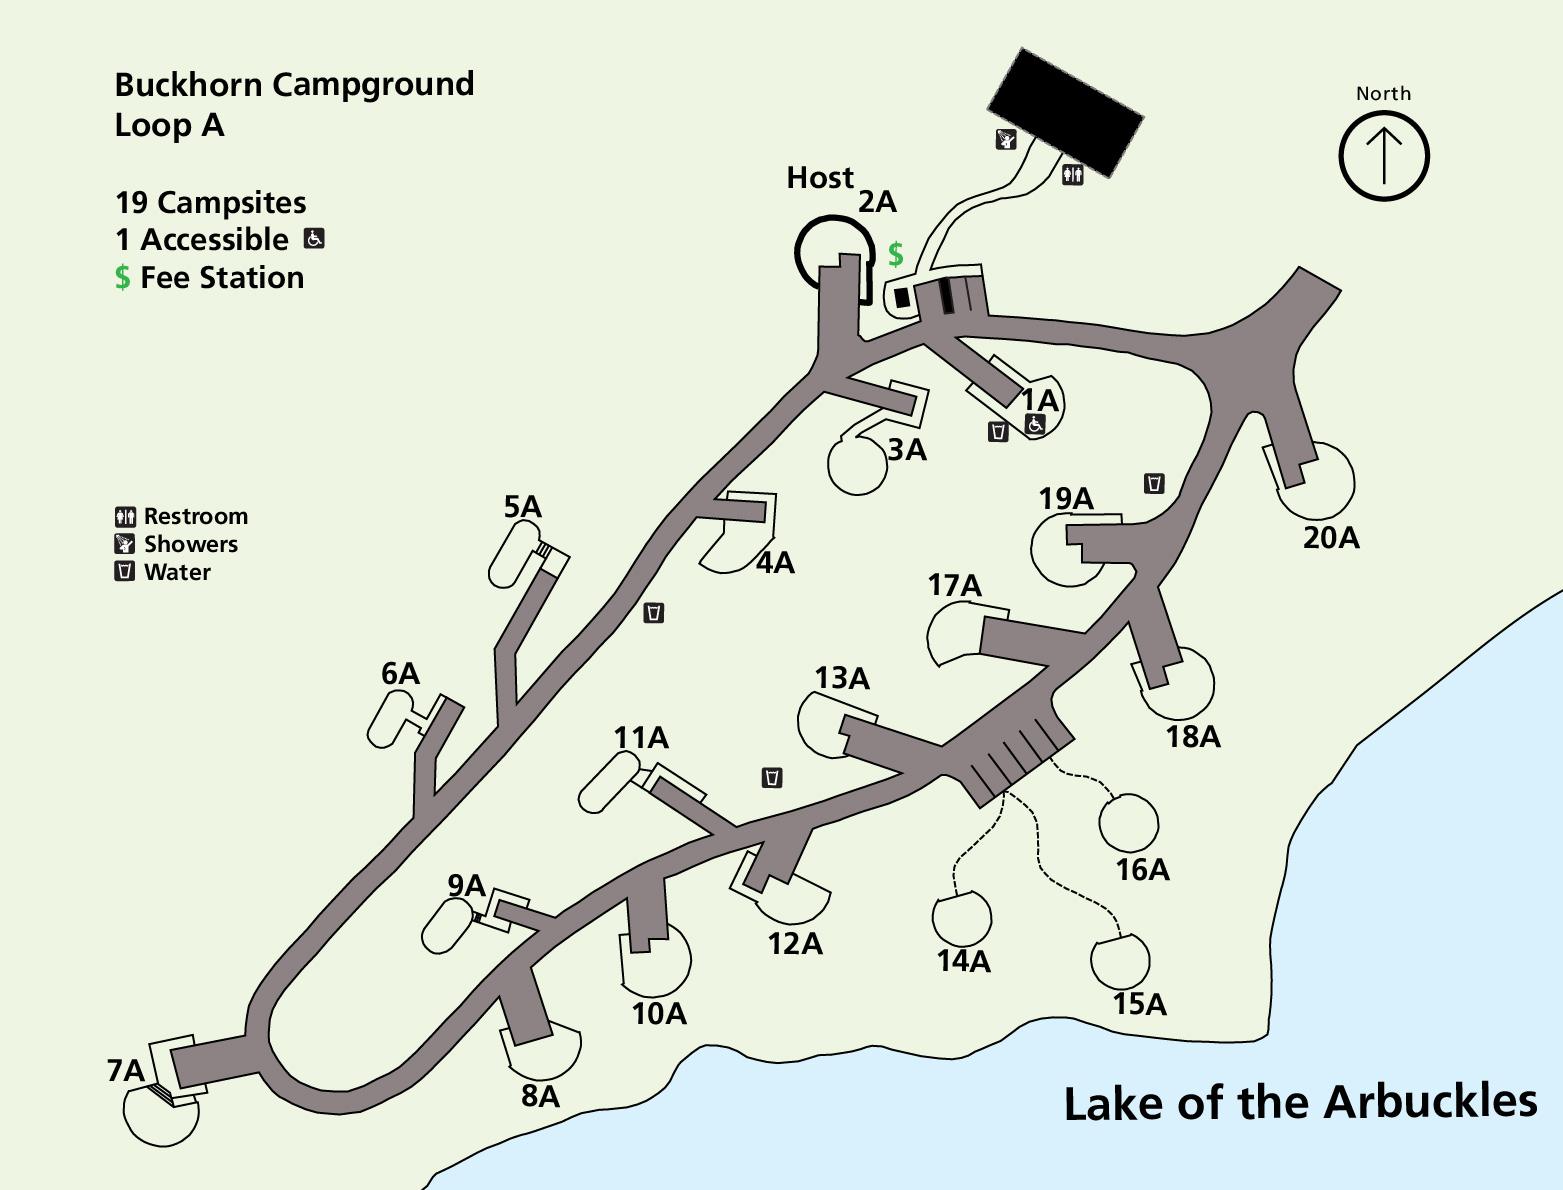 A map of Buckhorn Campground, Loop A, showing locations of campsites, restrooms, water, and more